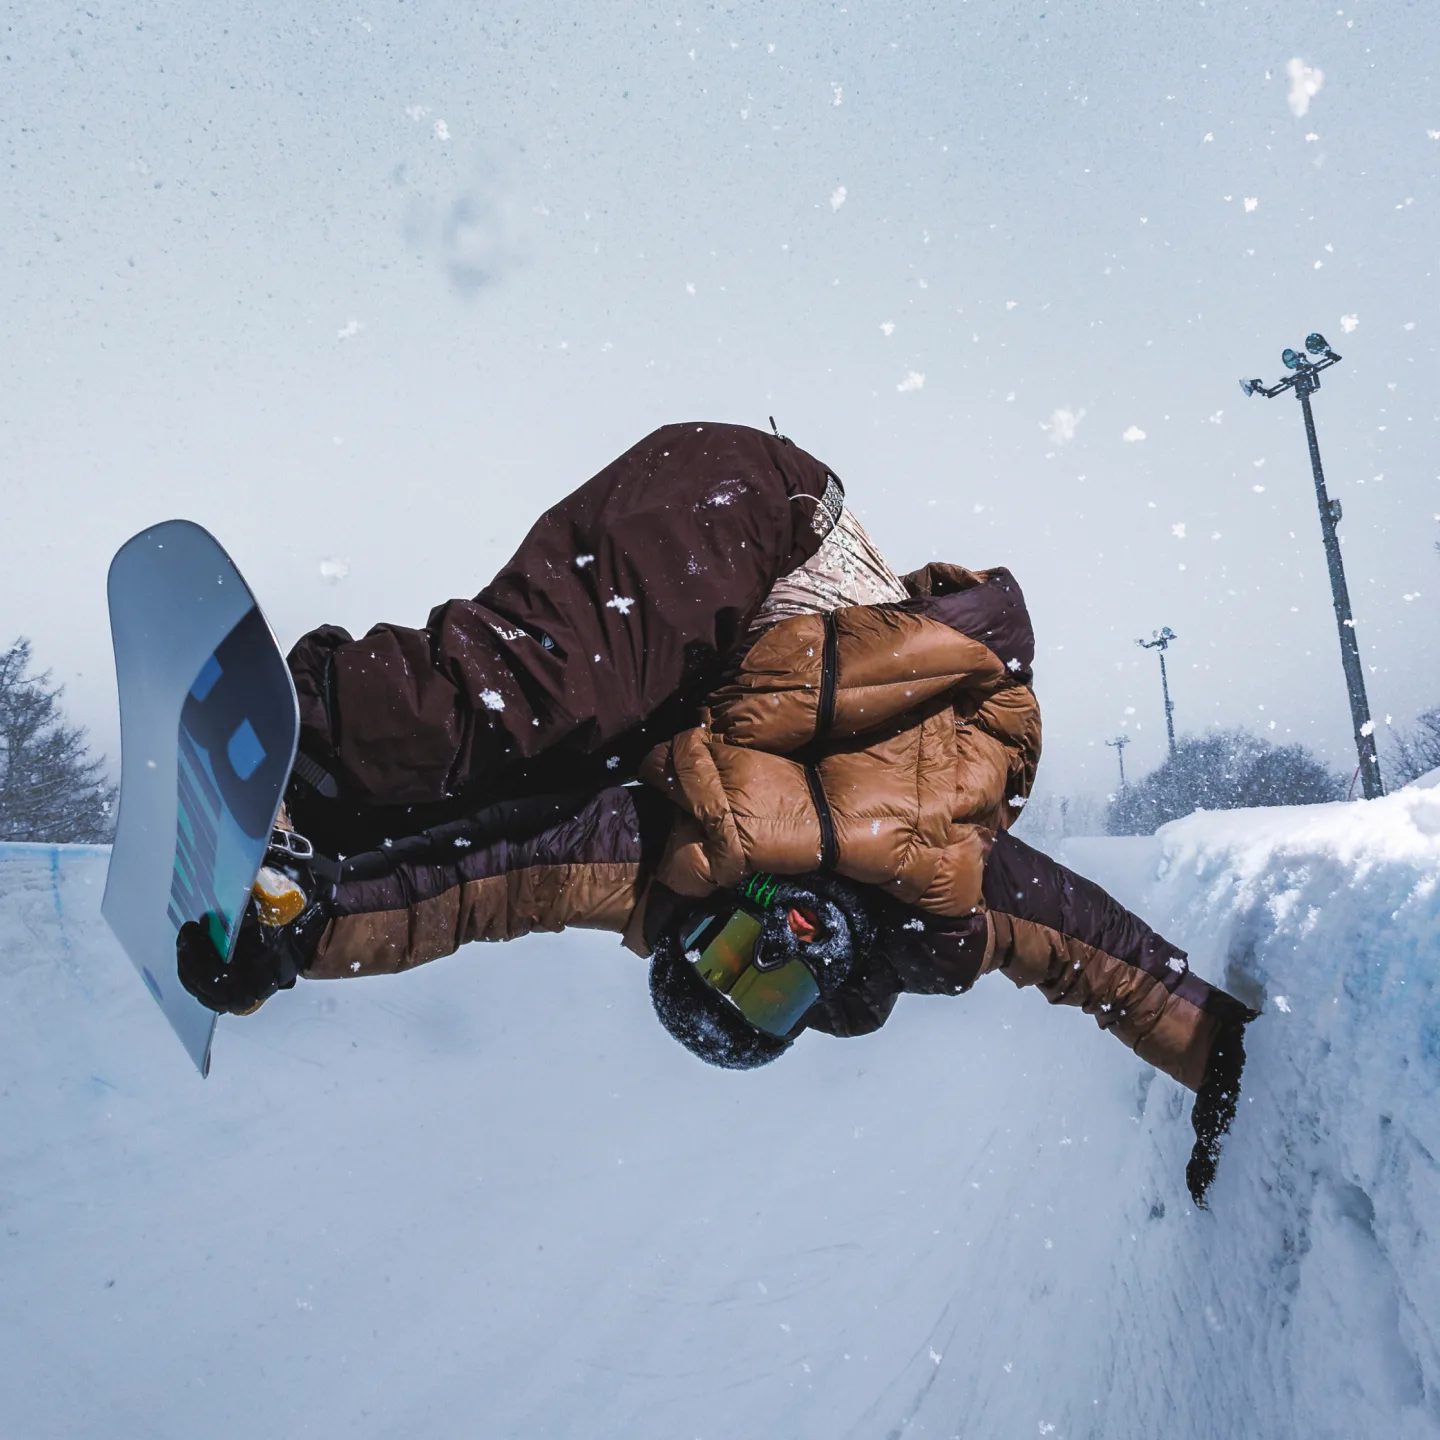 Snowboard star Kaishu Hirano joins the Swatch Proteam